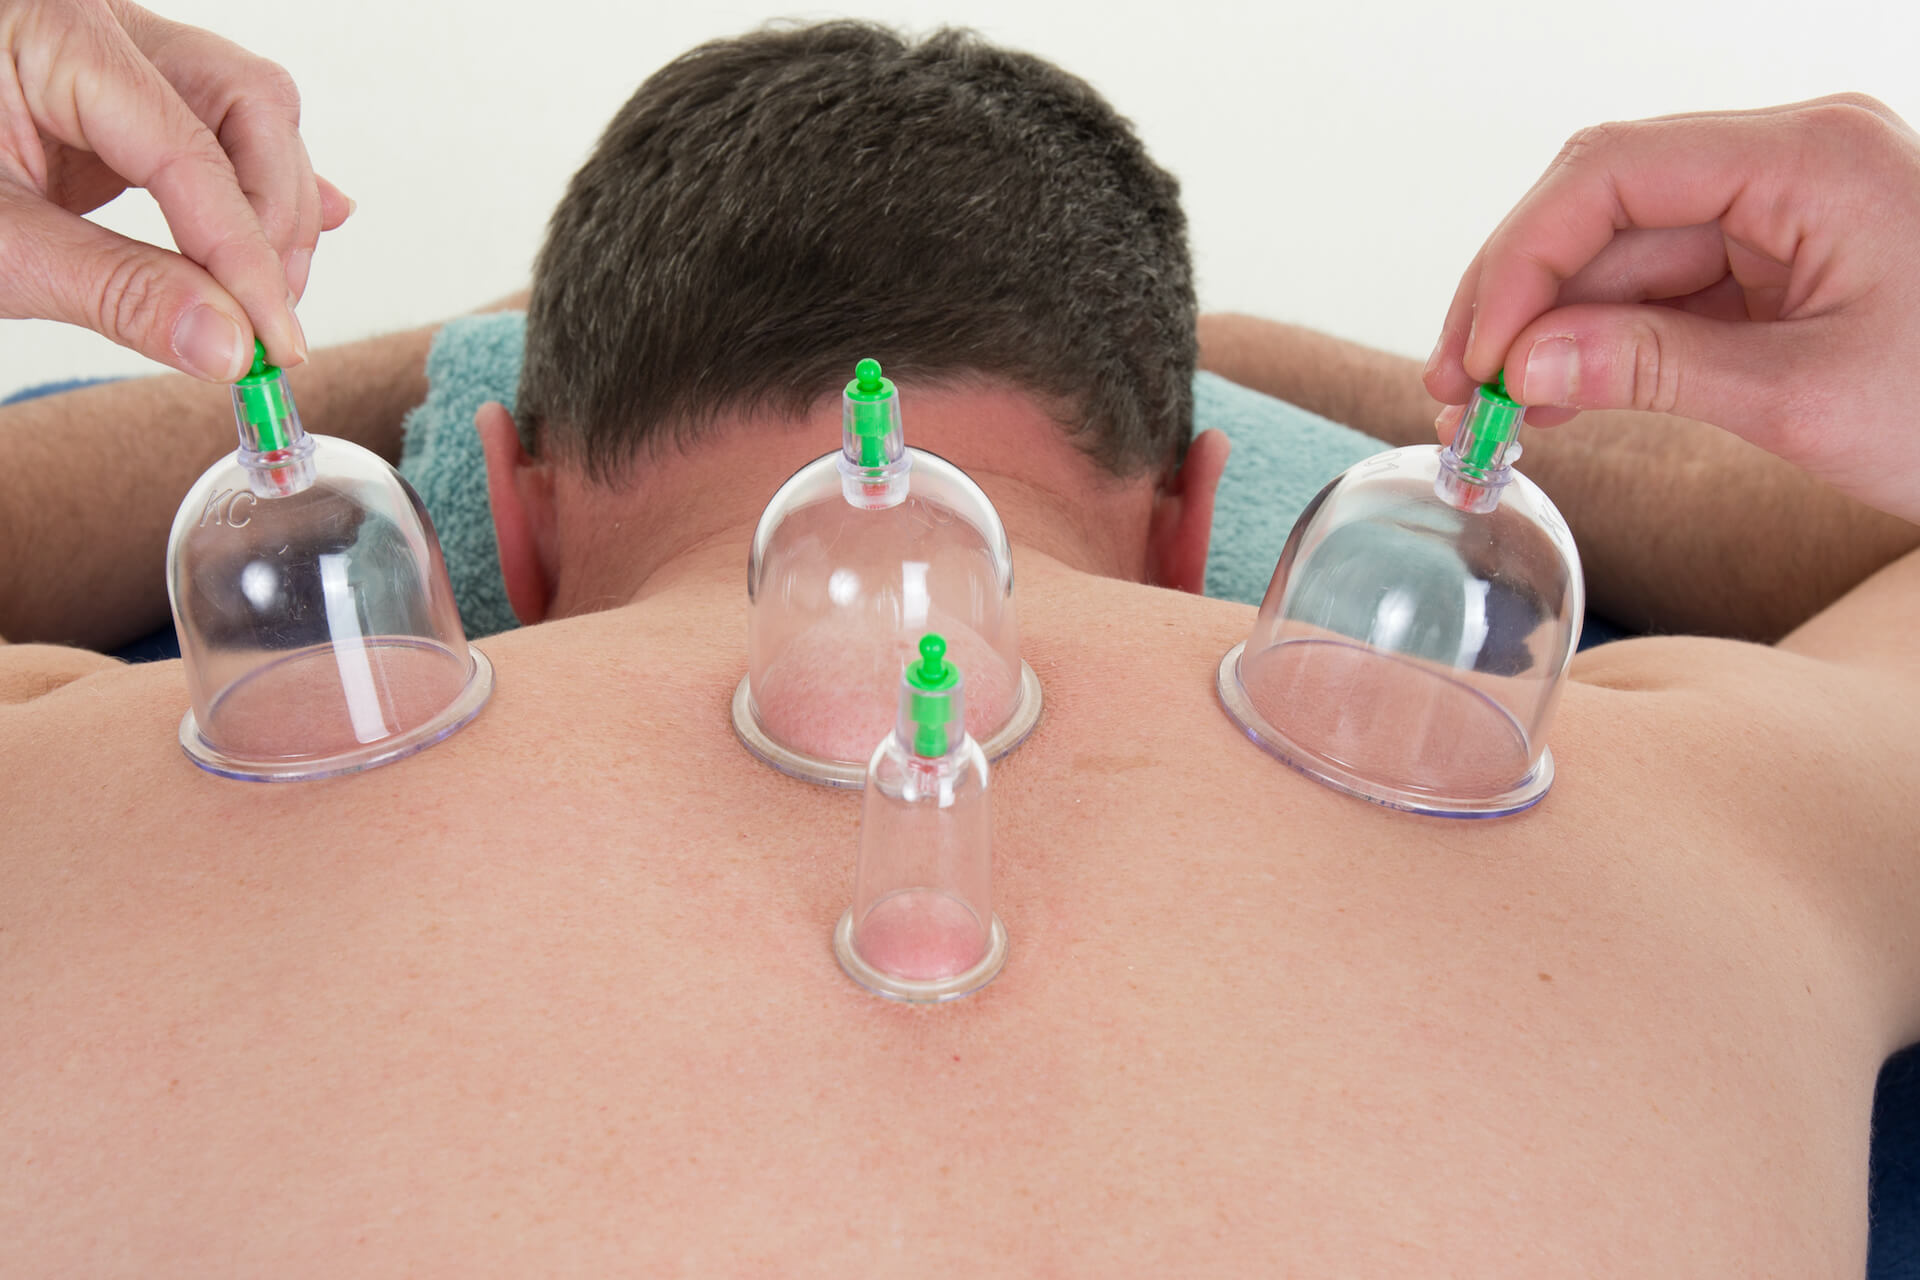 The Top 6 Benefits of Cupping Physical Therapy for Active or Athletic Men and Women Over 40